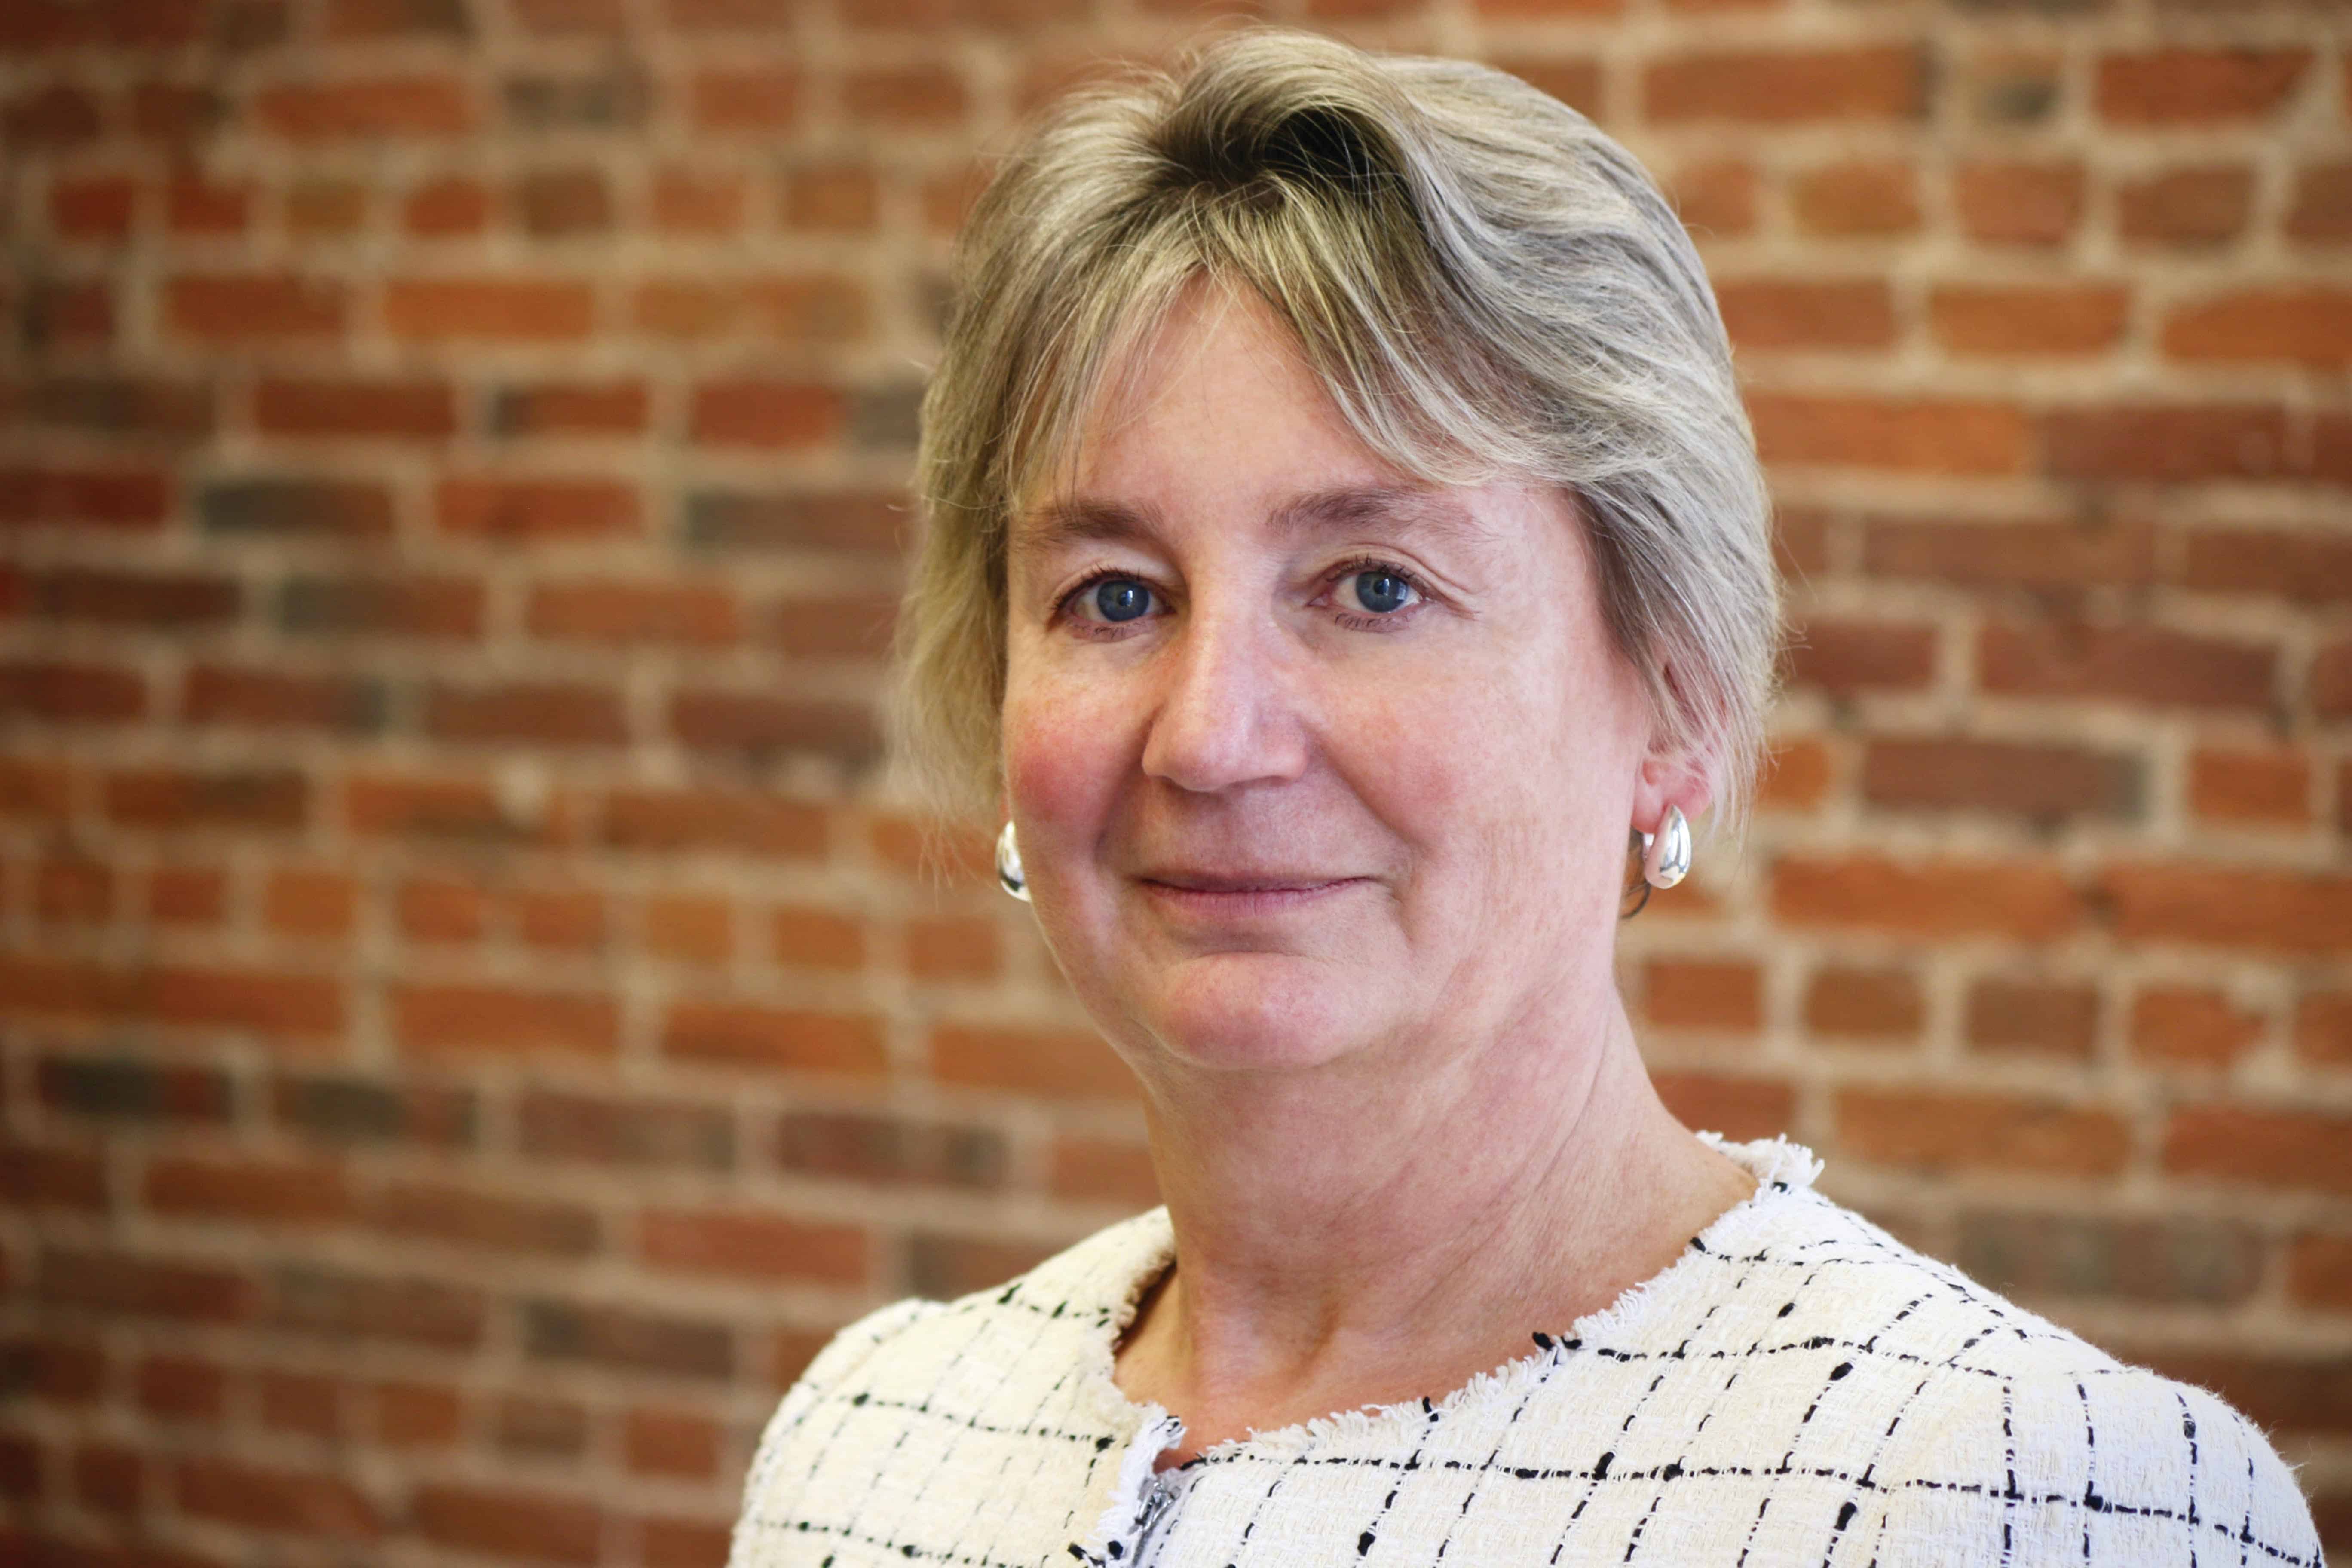 Susan Grantham, JSI’s New Health Services Division Vice President